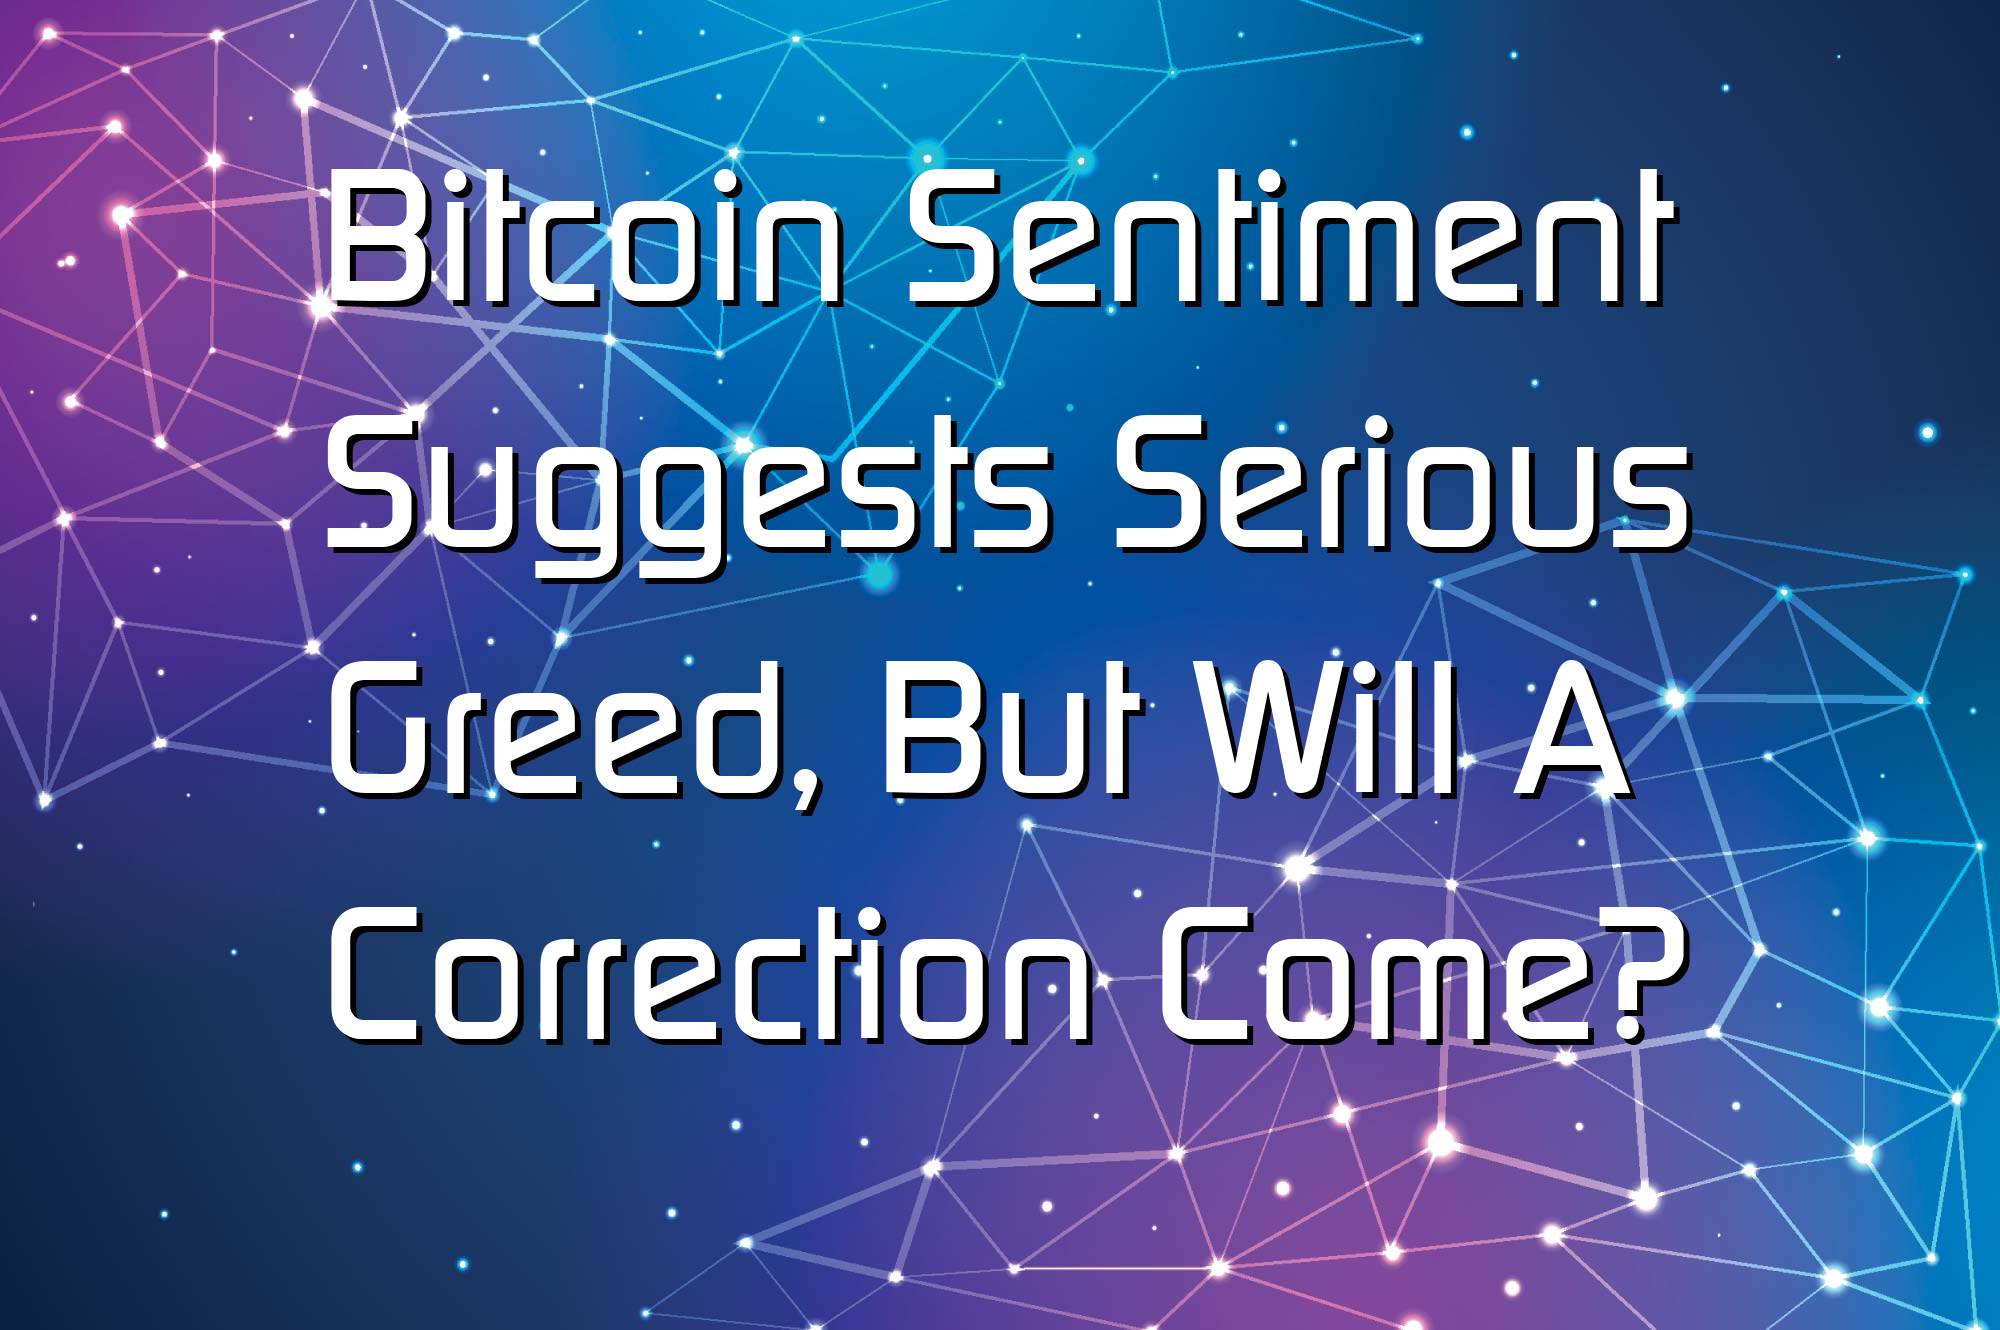 @$66506: Bitcoin Sentiment Suggests Serious Greed, But Will A Correction Come?